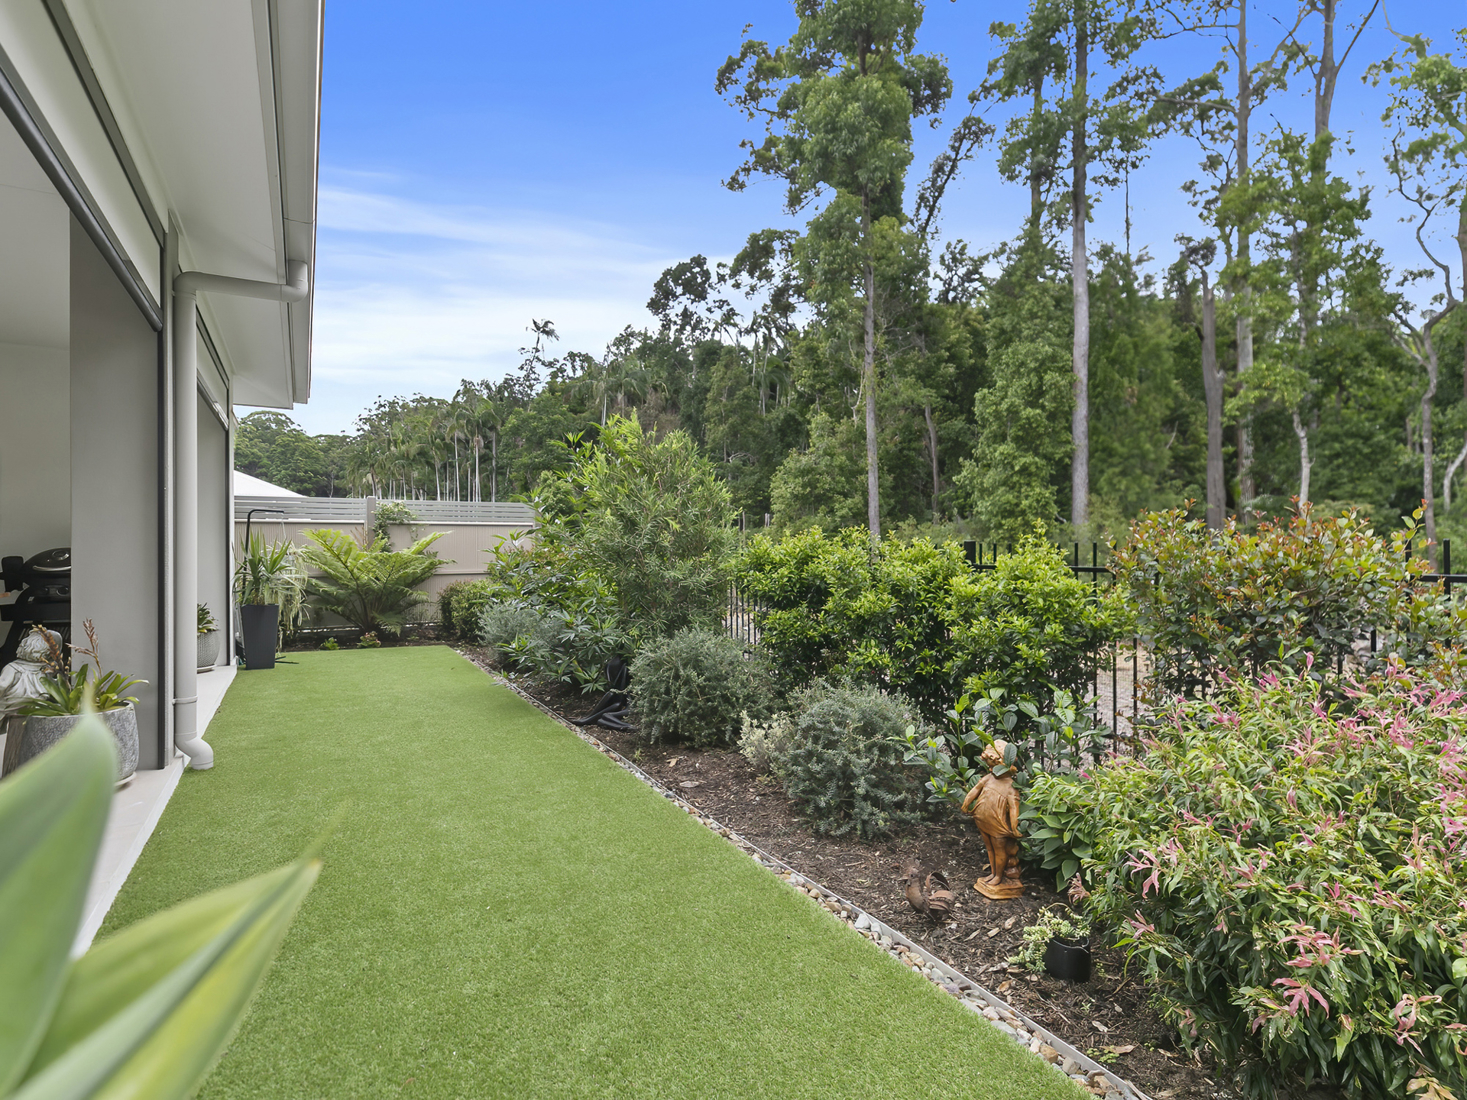 outdoor backyard space with green grass overlooking manicured garden and tropical rainforest background.